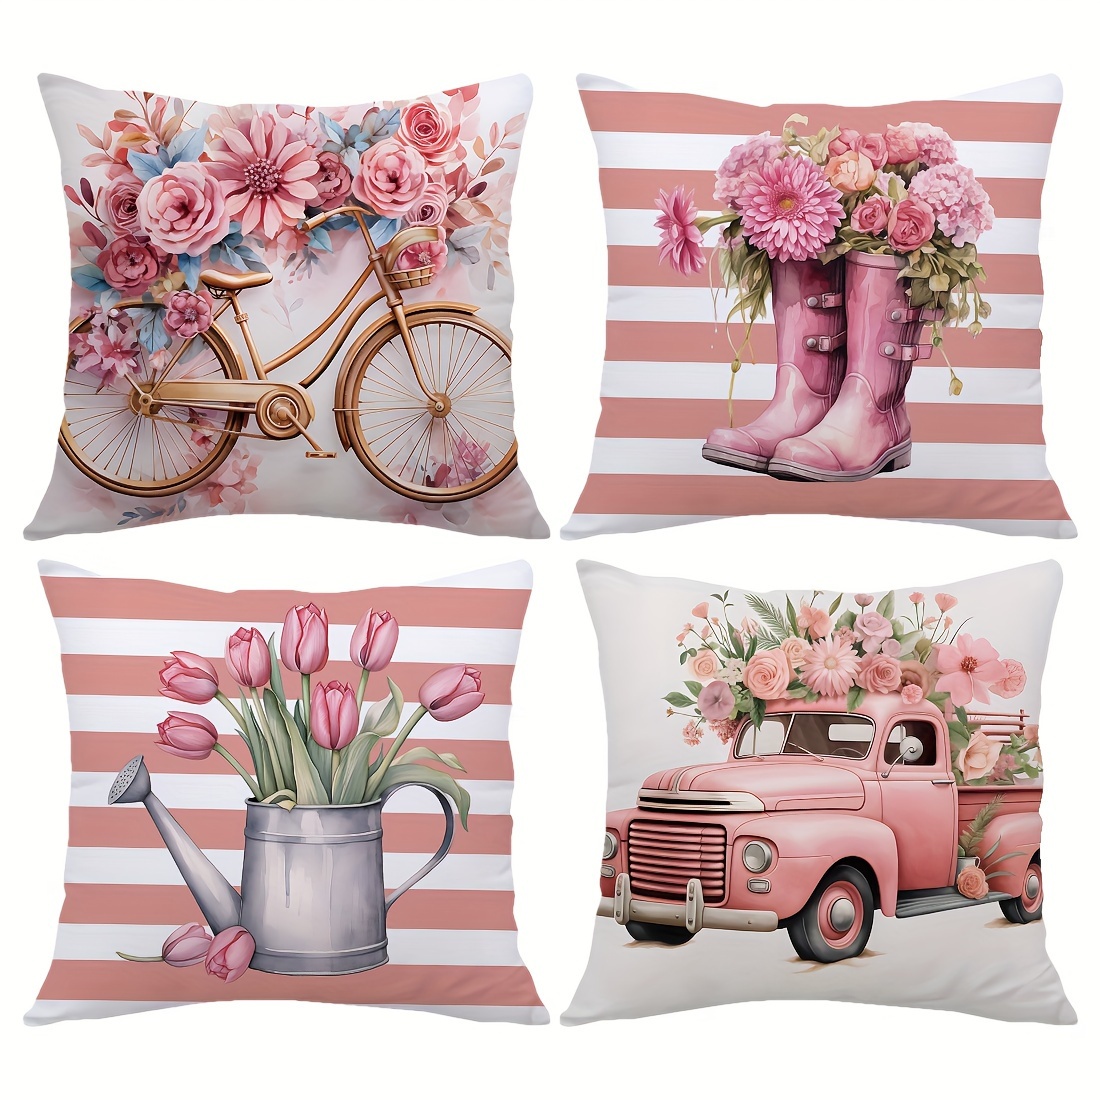 

4pcs Pink Rose Mute Watercolor Illustration Double-sided Print Peach Skin Velvet Throw Pillow Case, Home Comfortable Pillow Cover, Cushion Cover For Living Room Bedroom Sofa